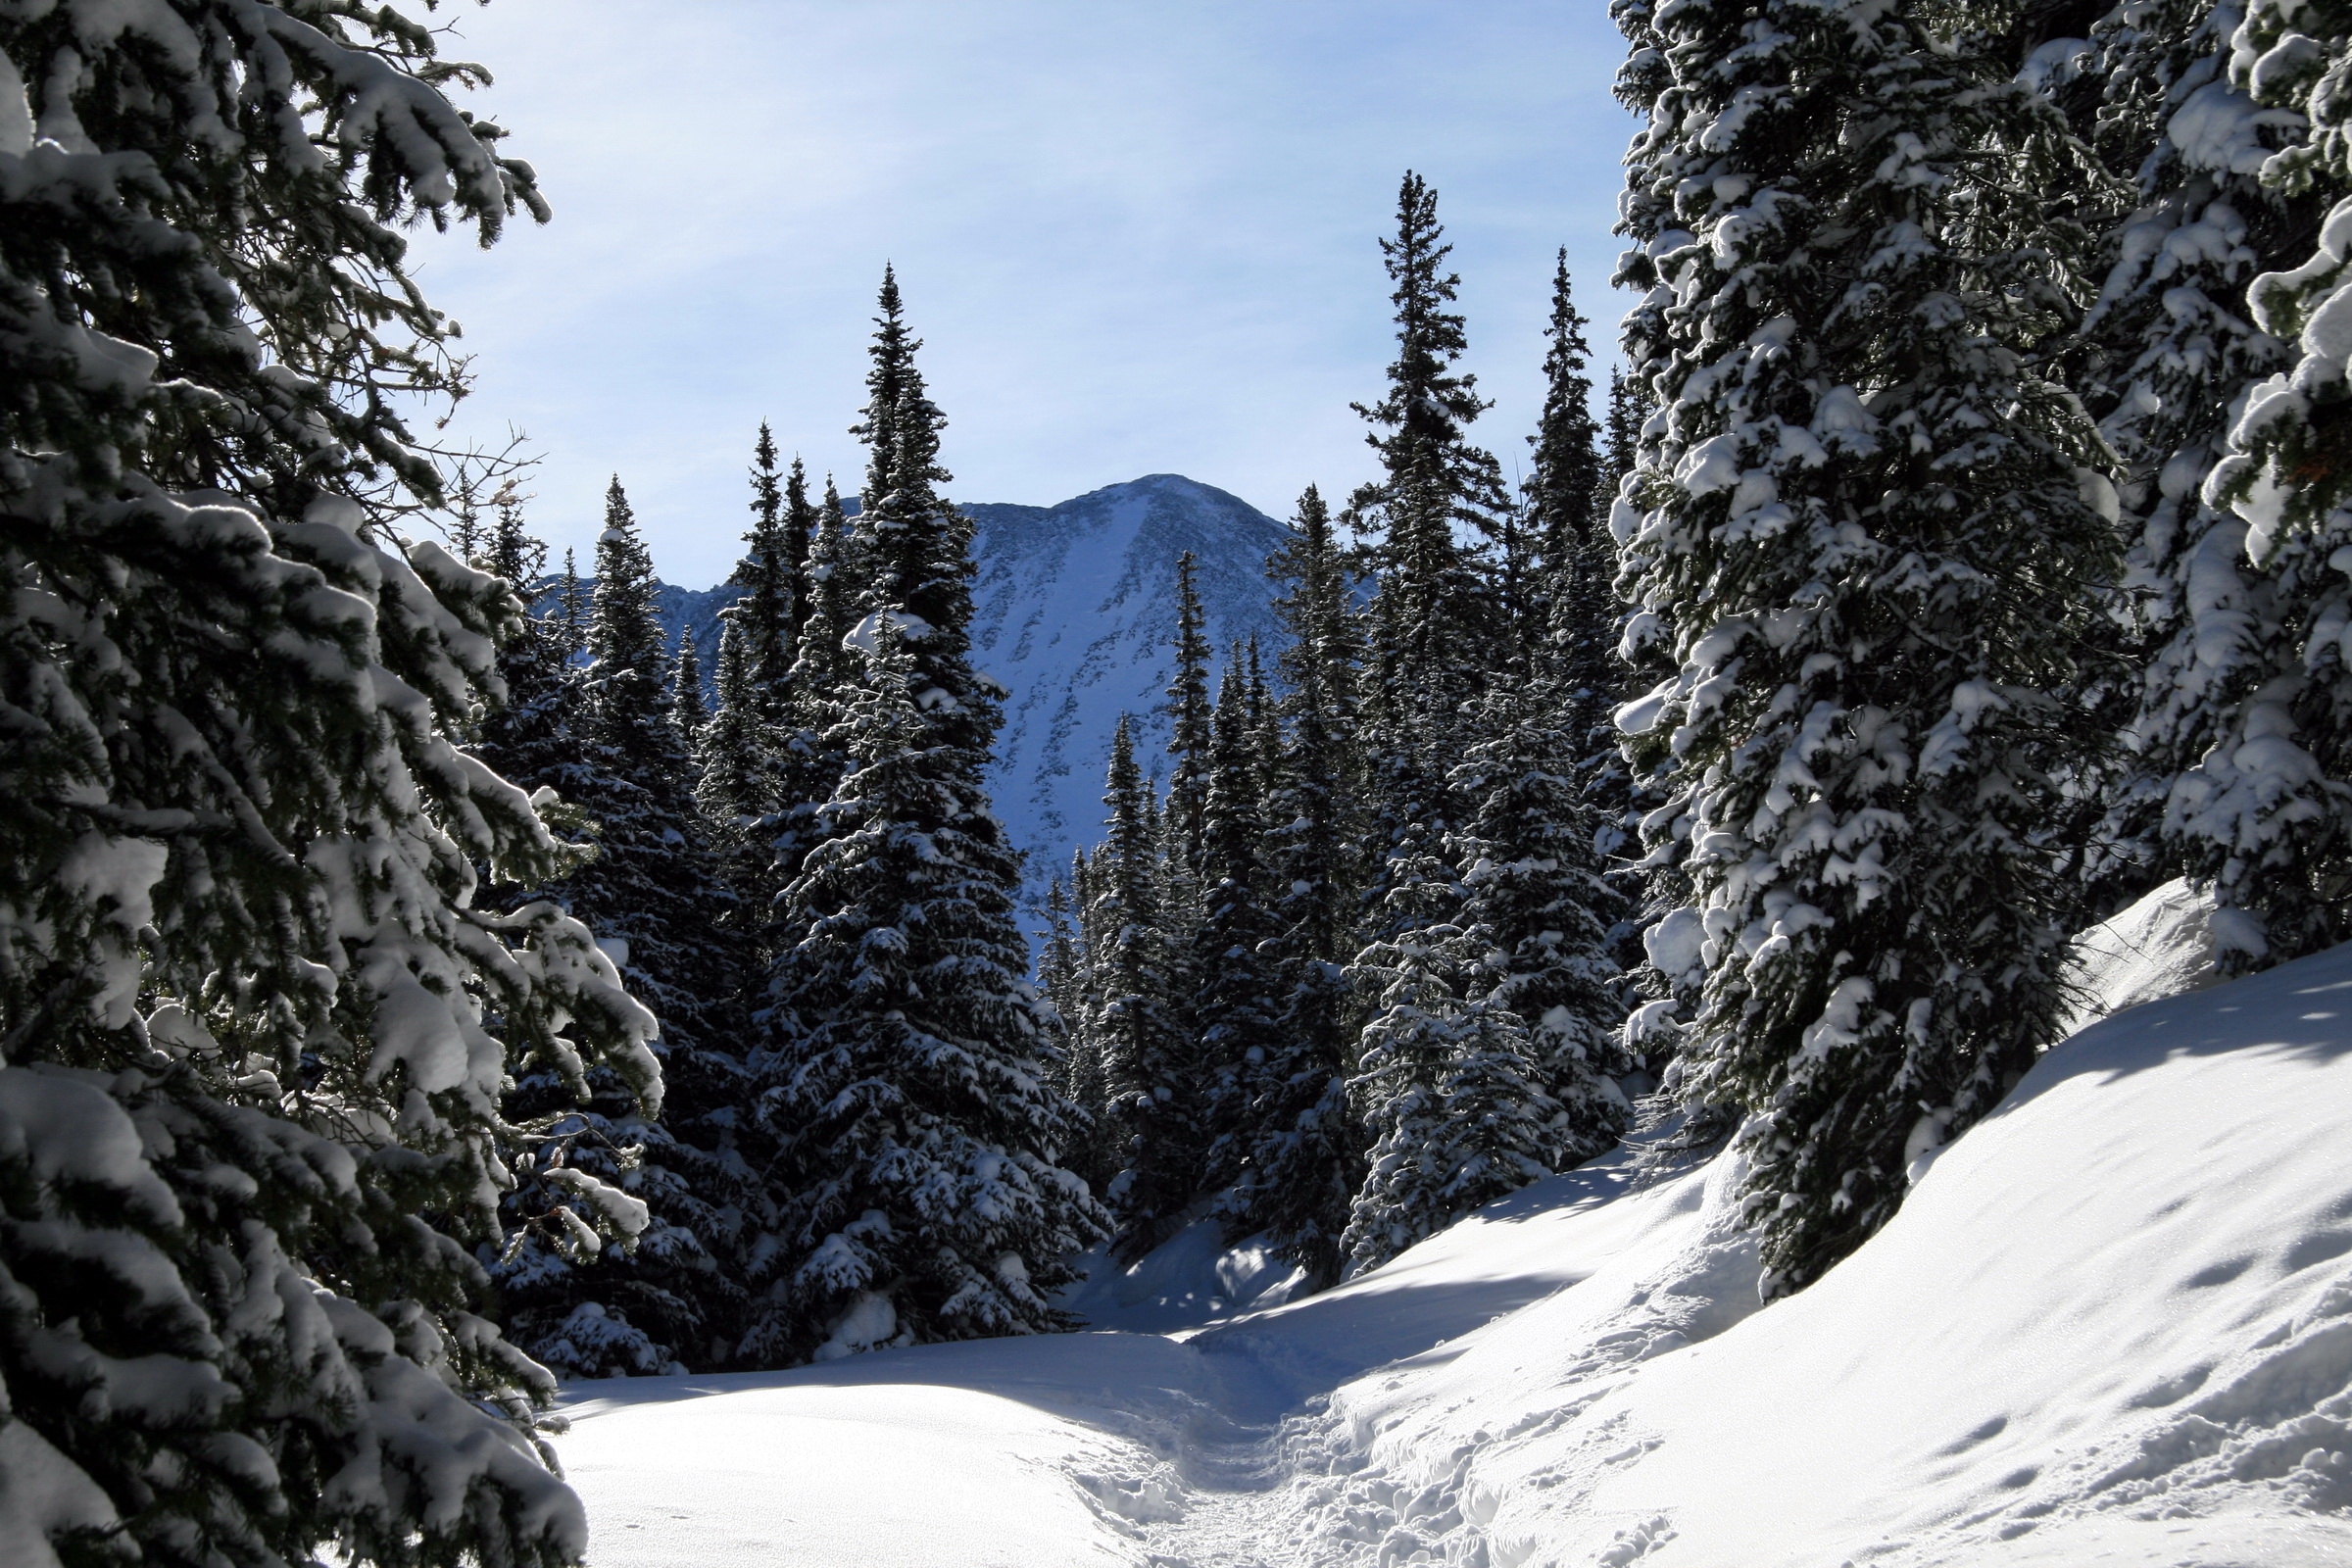 Wallpaper Full HD winter, nature, trees, sky, mountains, snow, forest, ate, colorado